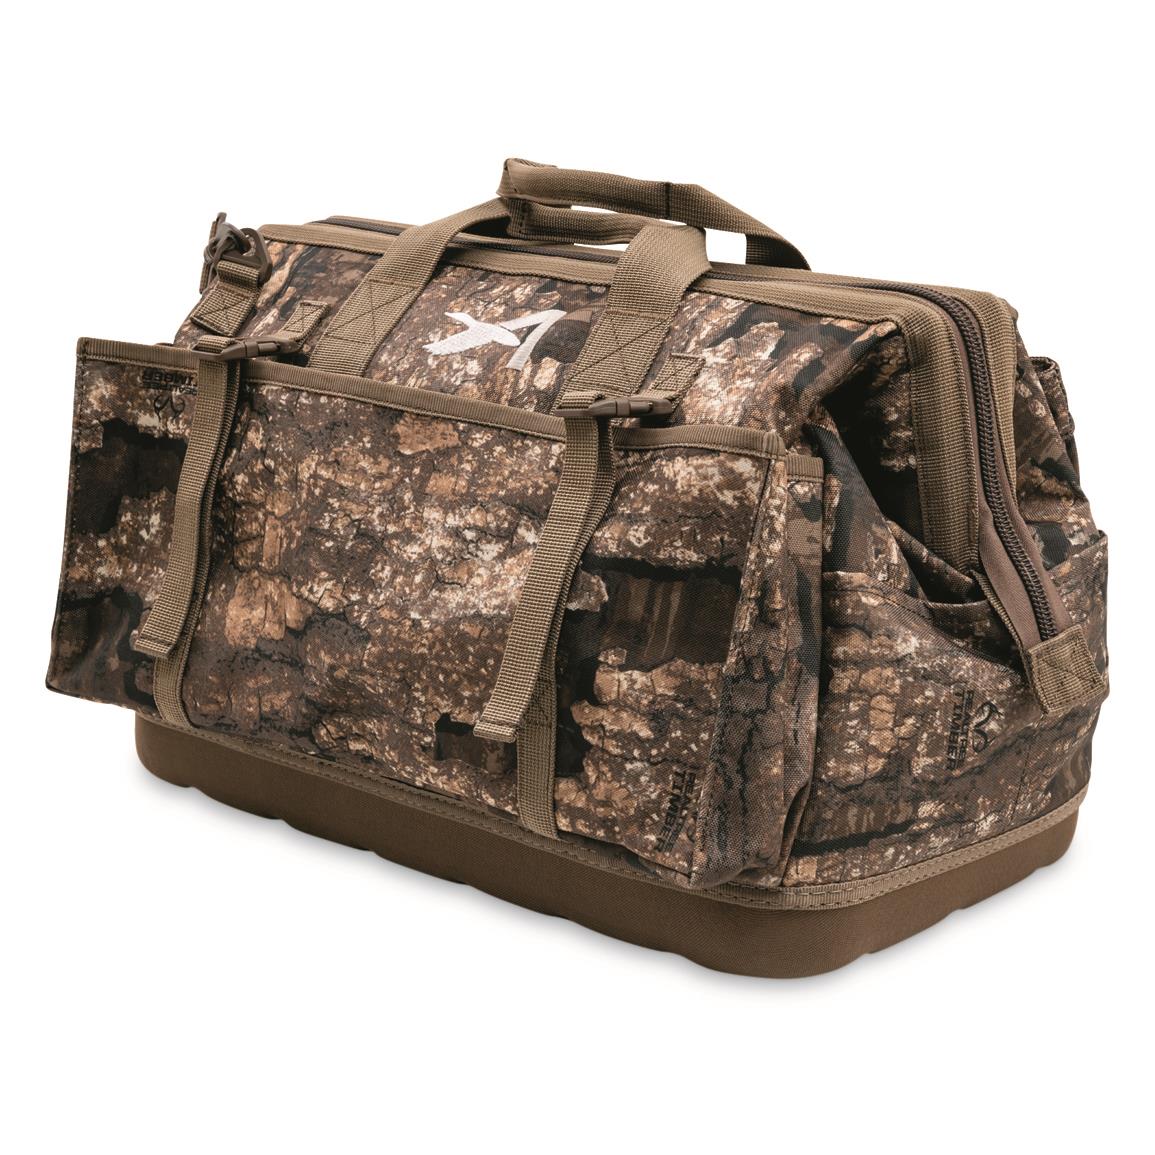 ALPS Outdoorz Pit Blind Bag, Realtree Timber™